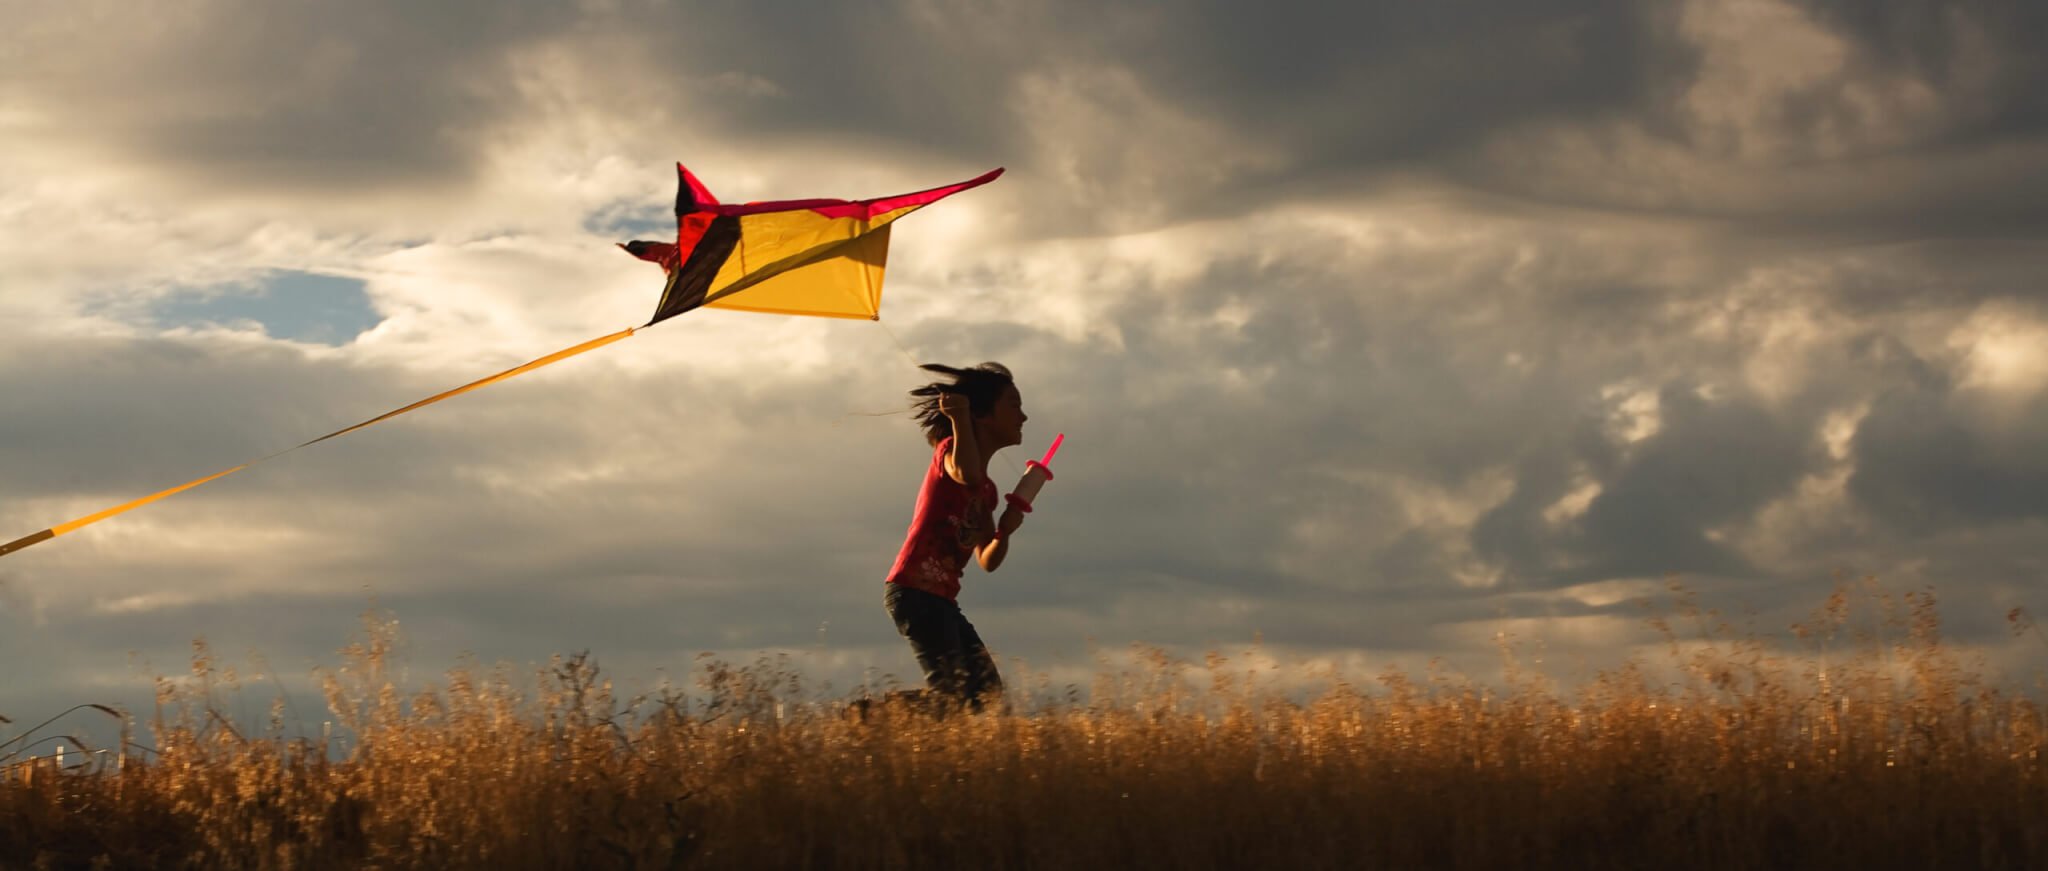 National Kite Flying Day (February 8th) | Days Of The Year